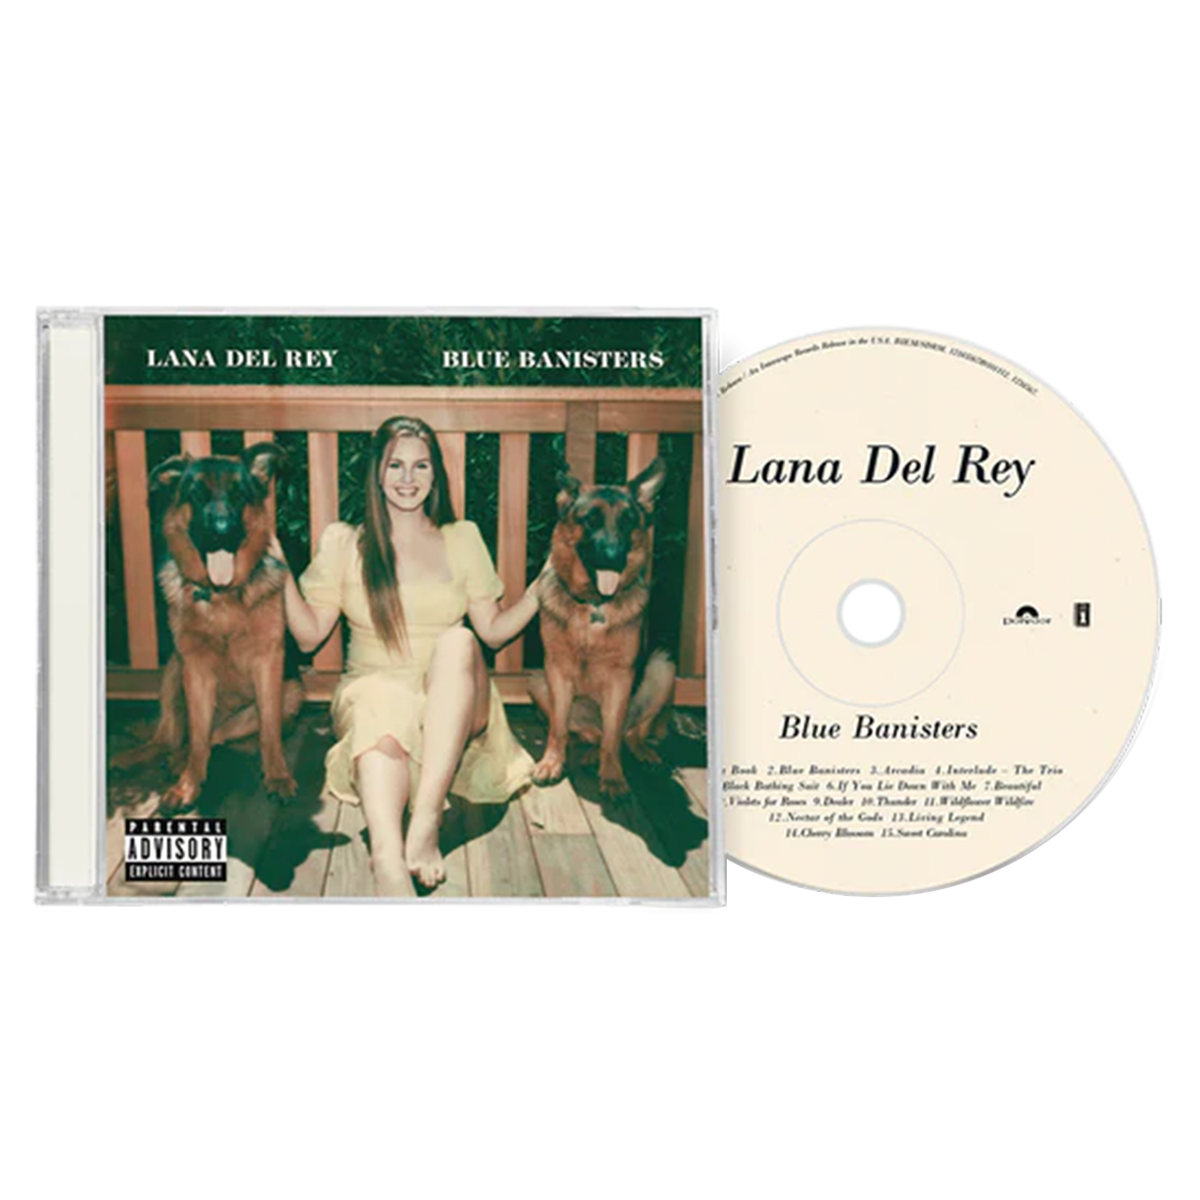 Lana Del Rey - BLUE BANISTERS EXCLUSIVE CD #1